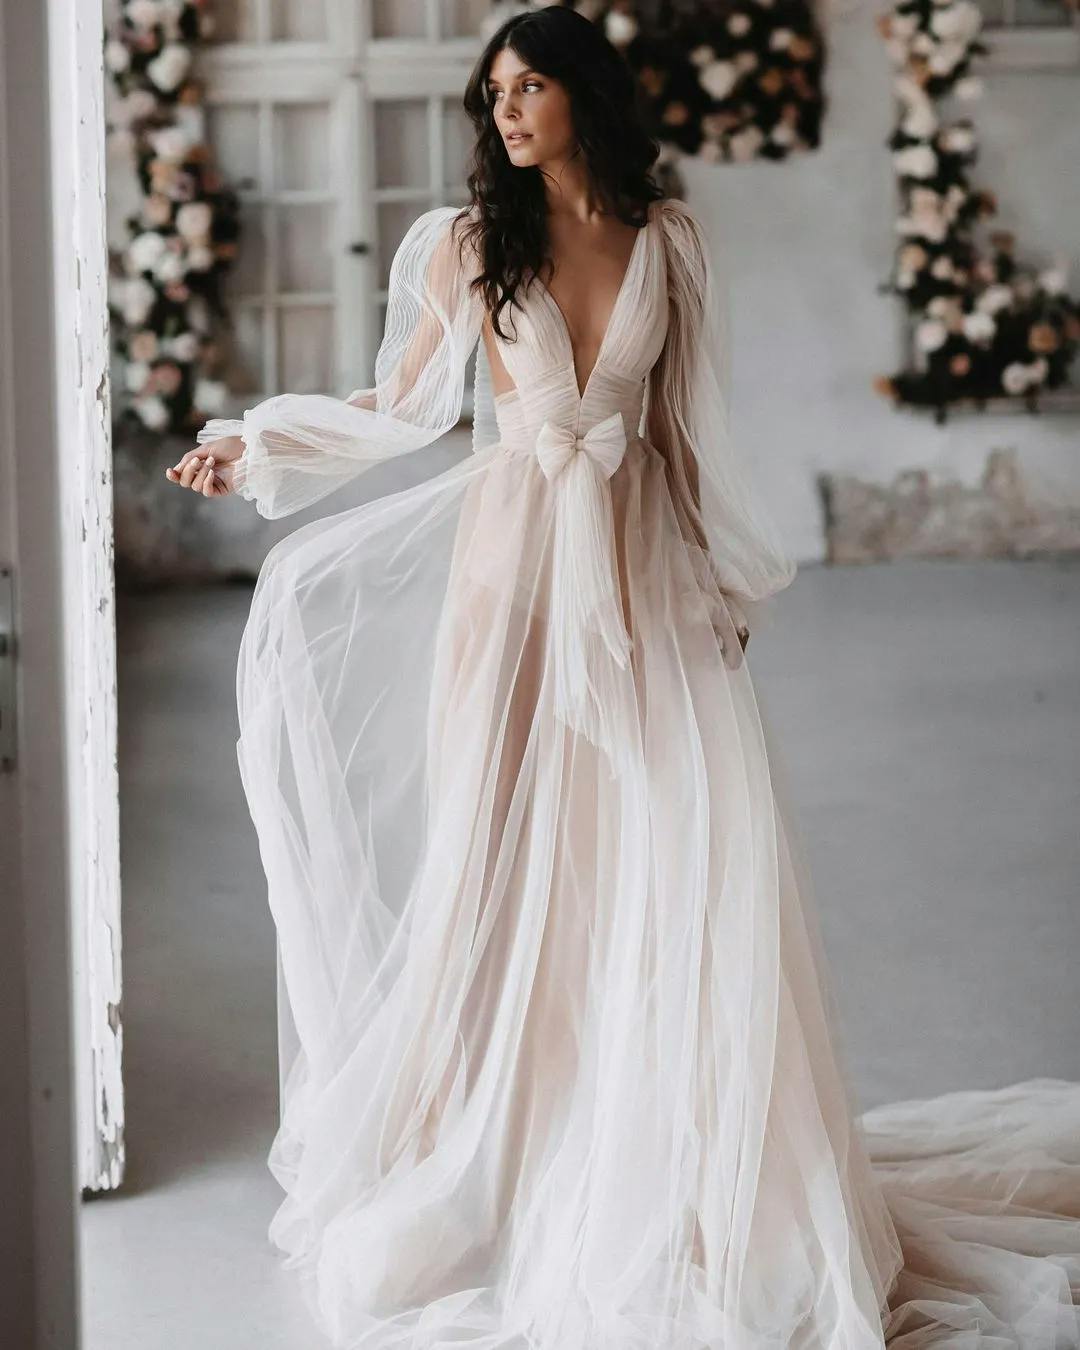 Bride wearing wedding dres with sheer lace and cutouts